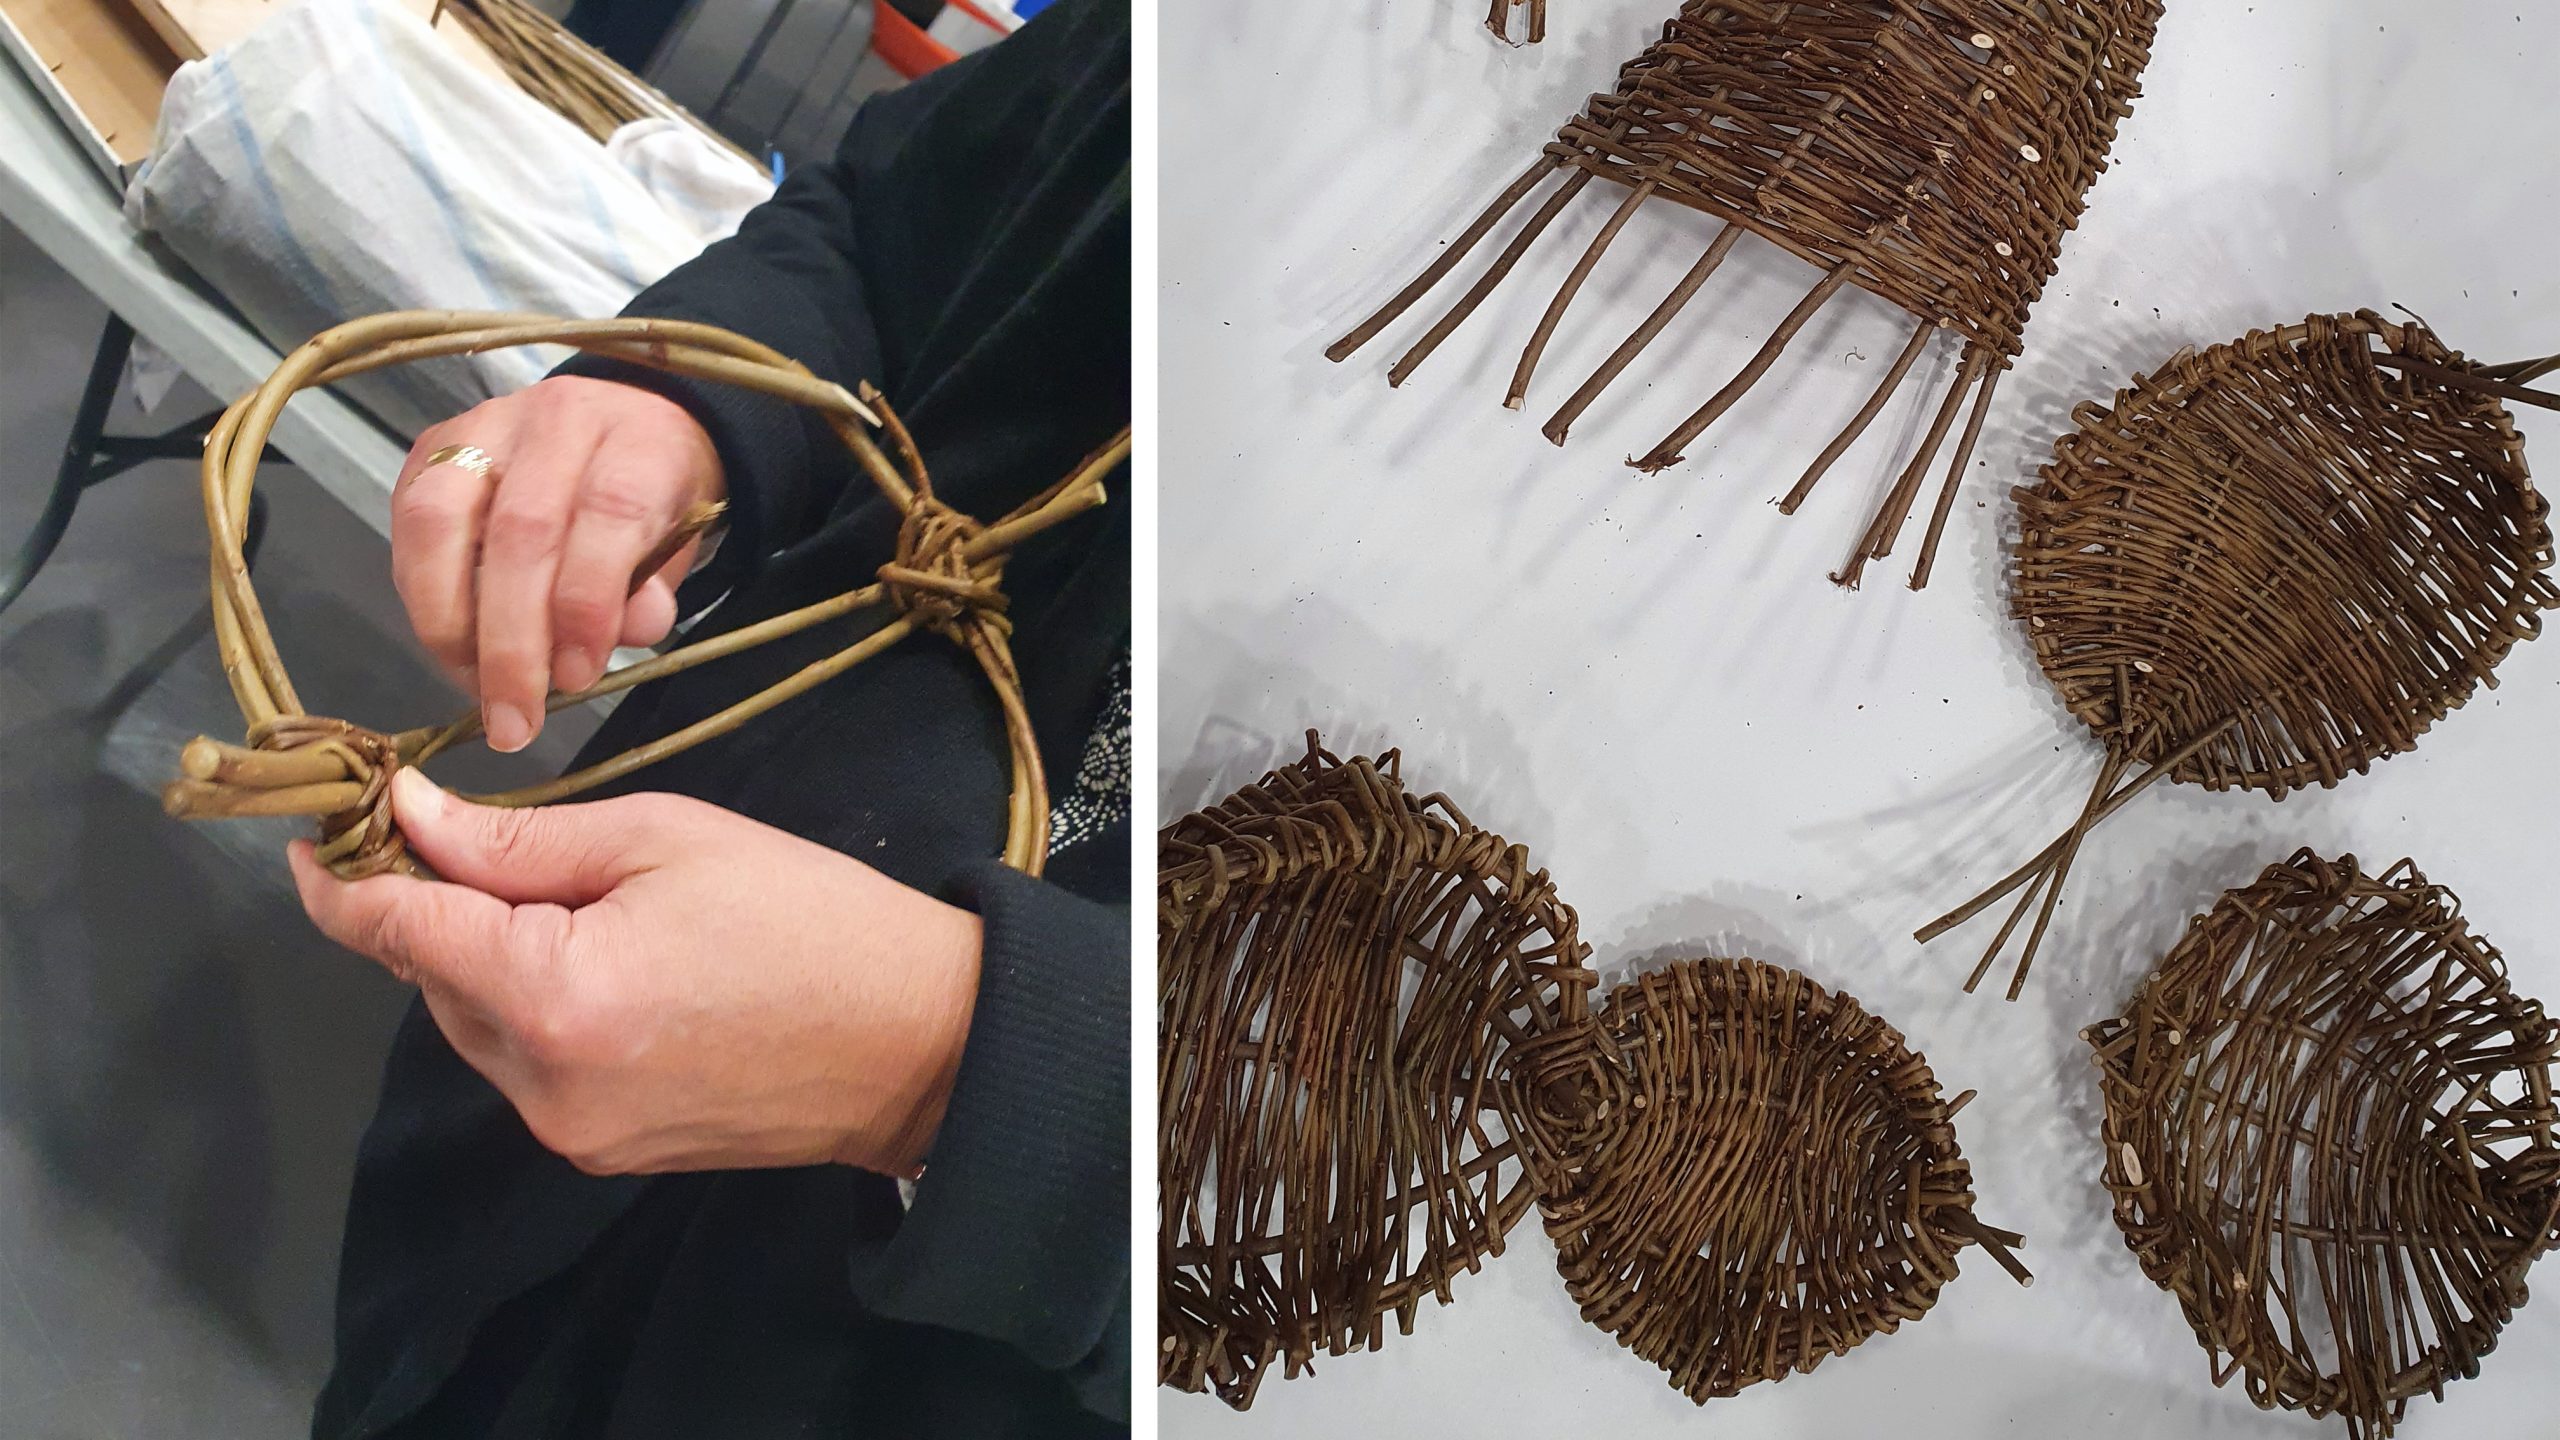 on the left: a person weaving a basket during a workshop. On the right willow structures on a table